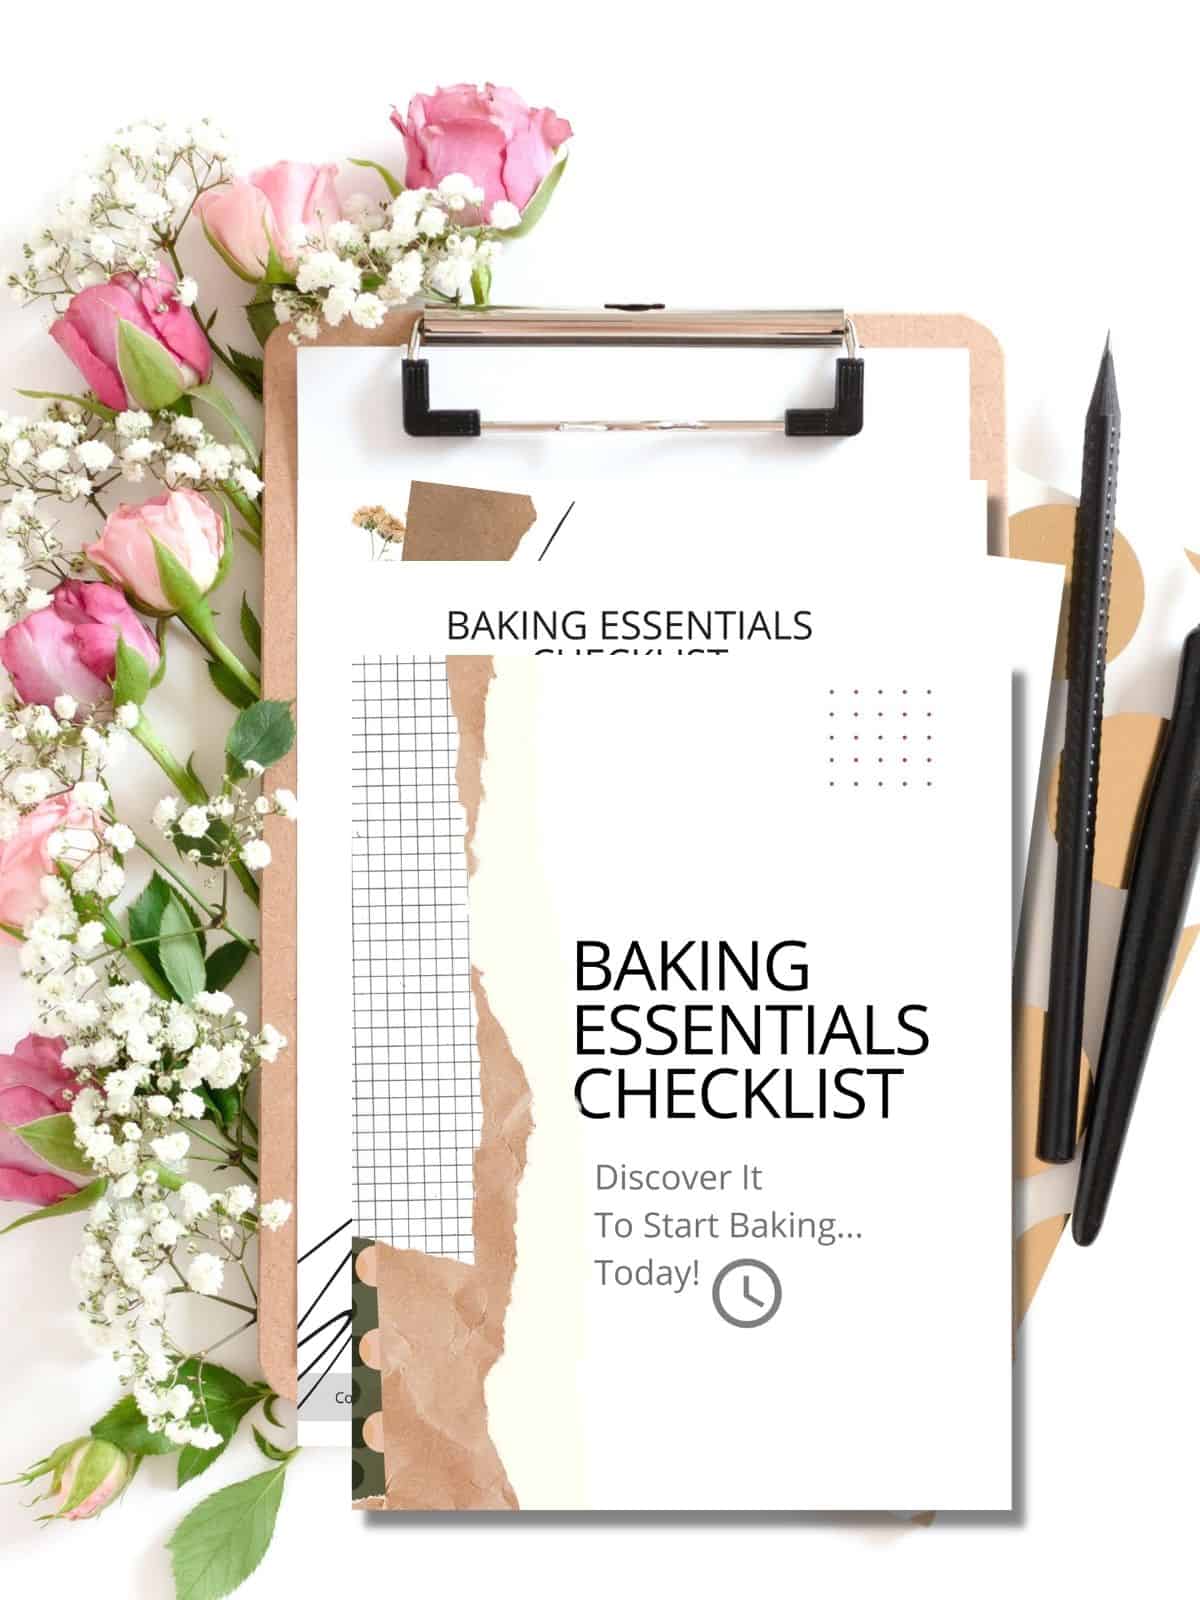 Baking Essentials Checklist Mockup with roses